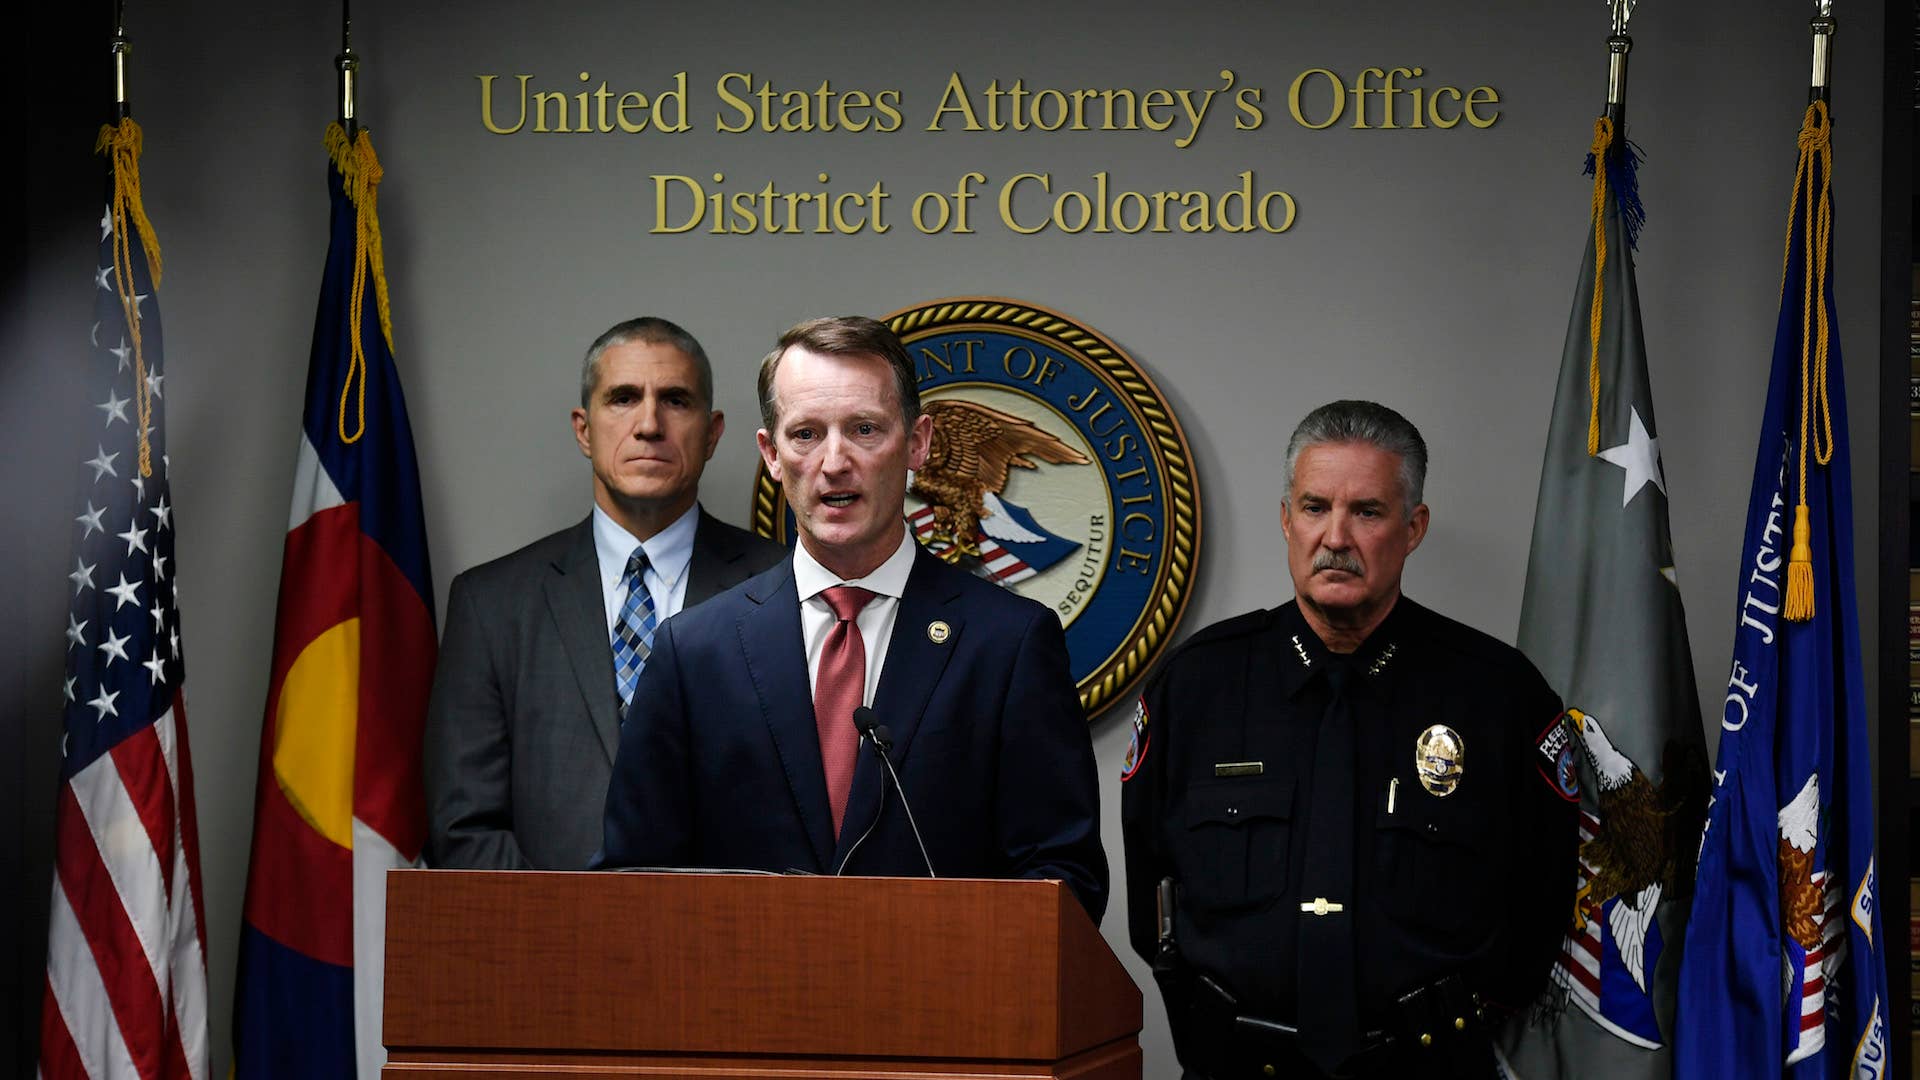 U.S. Attorney Jason R. Dunn, center, speaks during a press conference